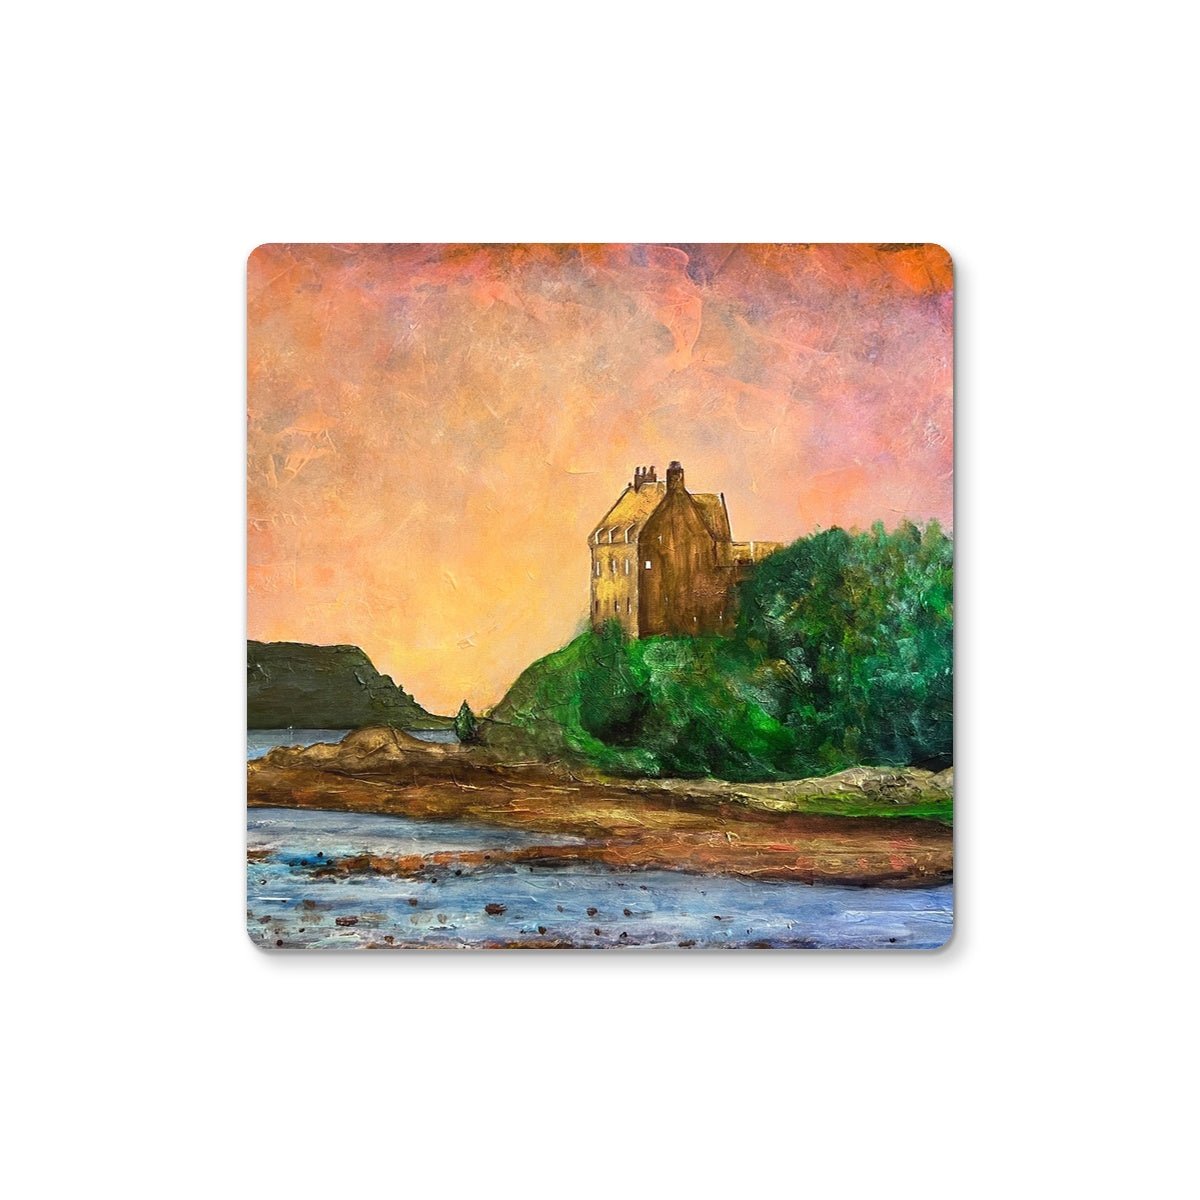 Duntrune Castle Art Gifts Coaster-Coasters-Scottish Castles Art Gallery-Single Coaster-Paintings, Prints, Homeware, Art Gifts From Scotland By Scottish Artist Kevin Hunter